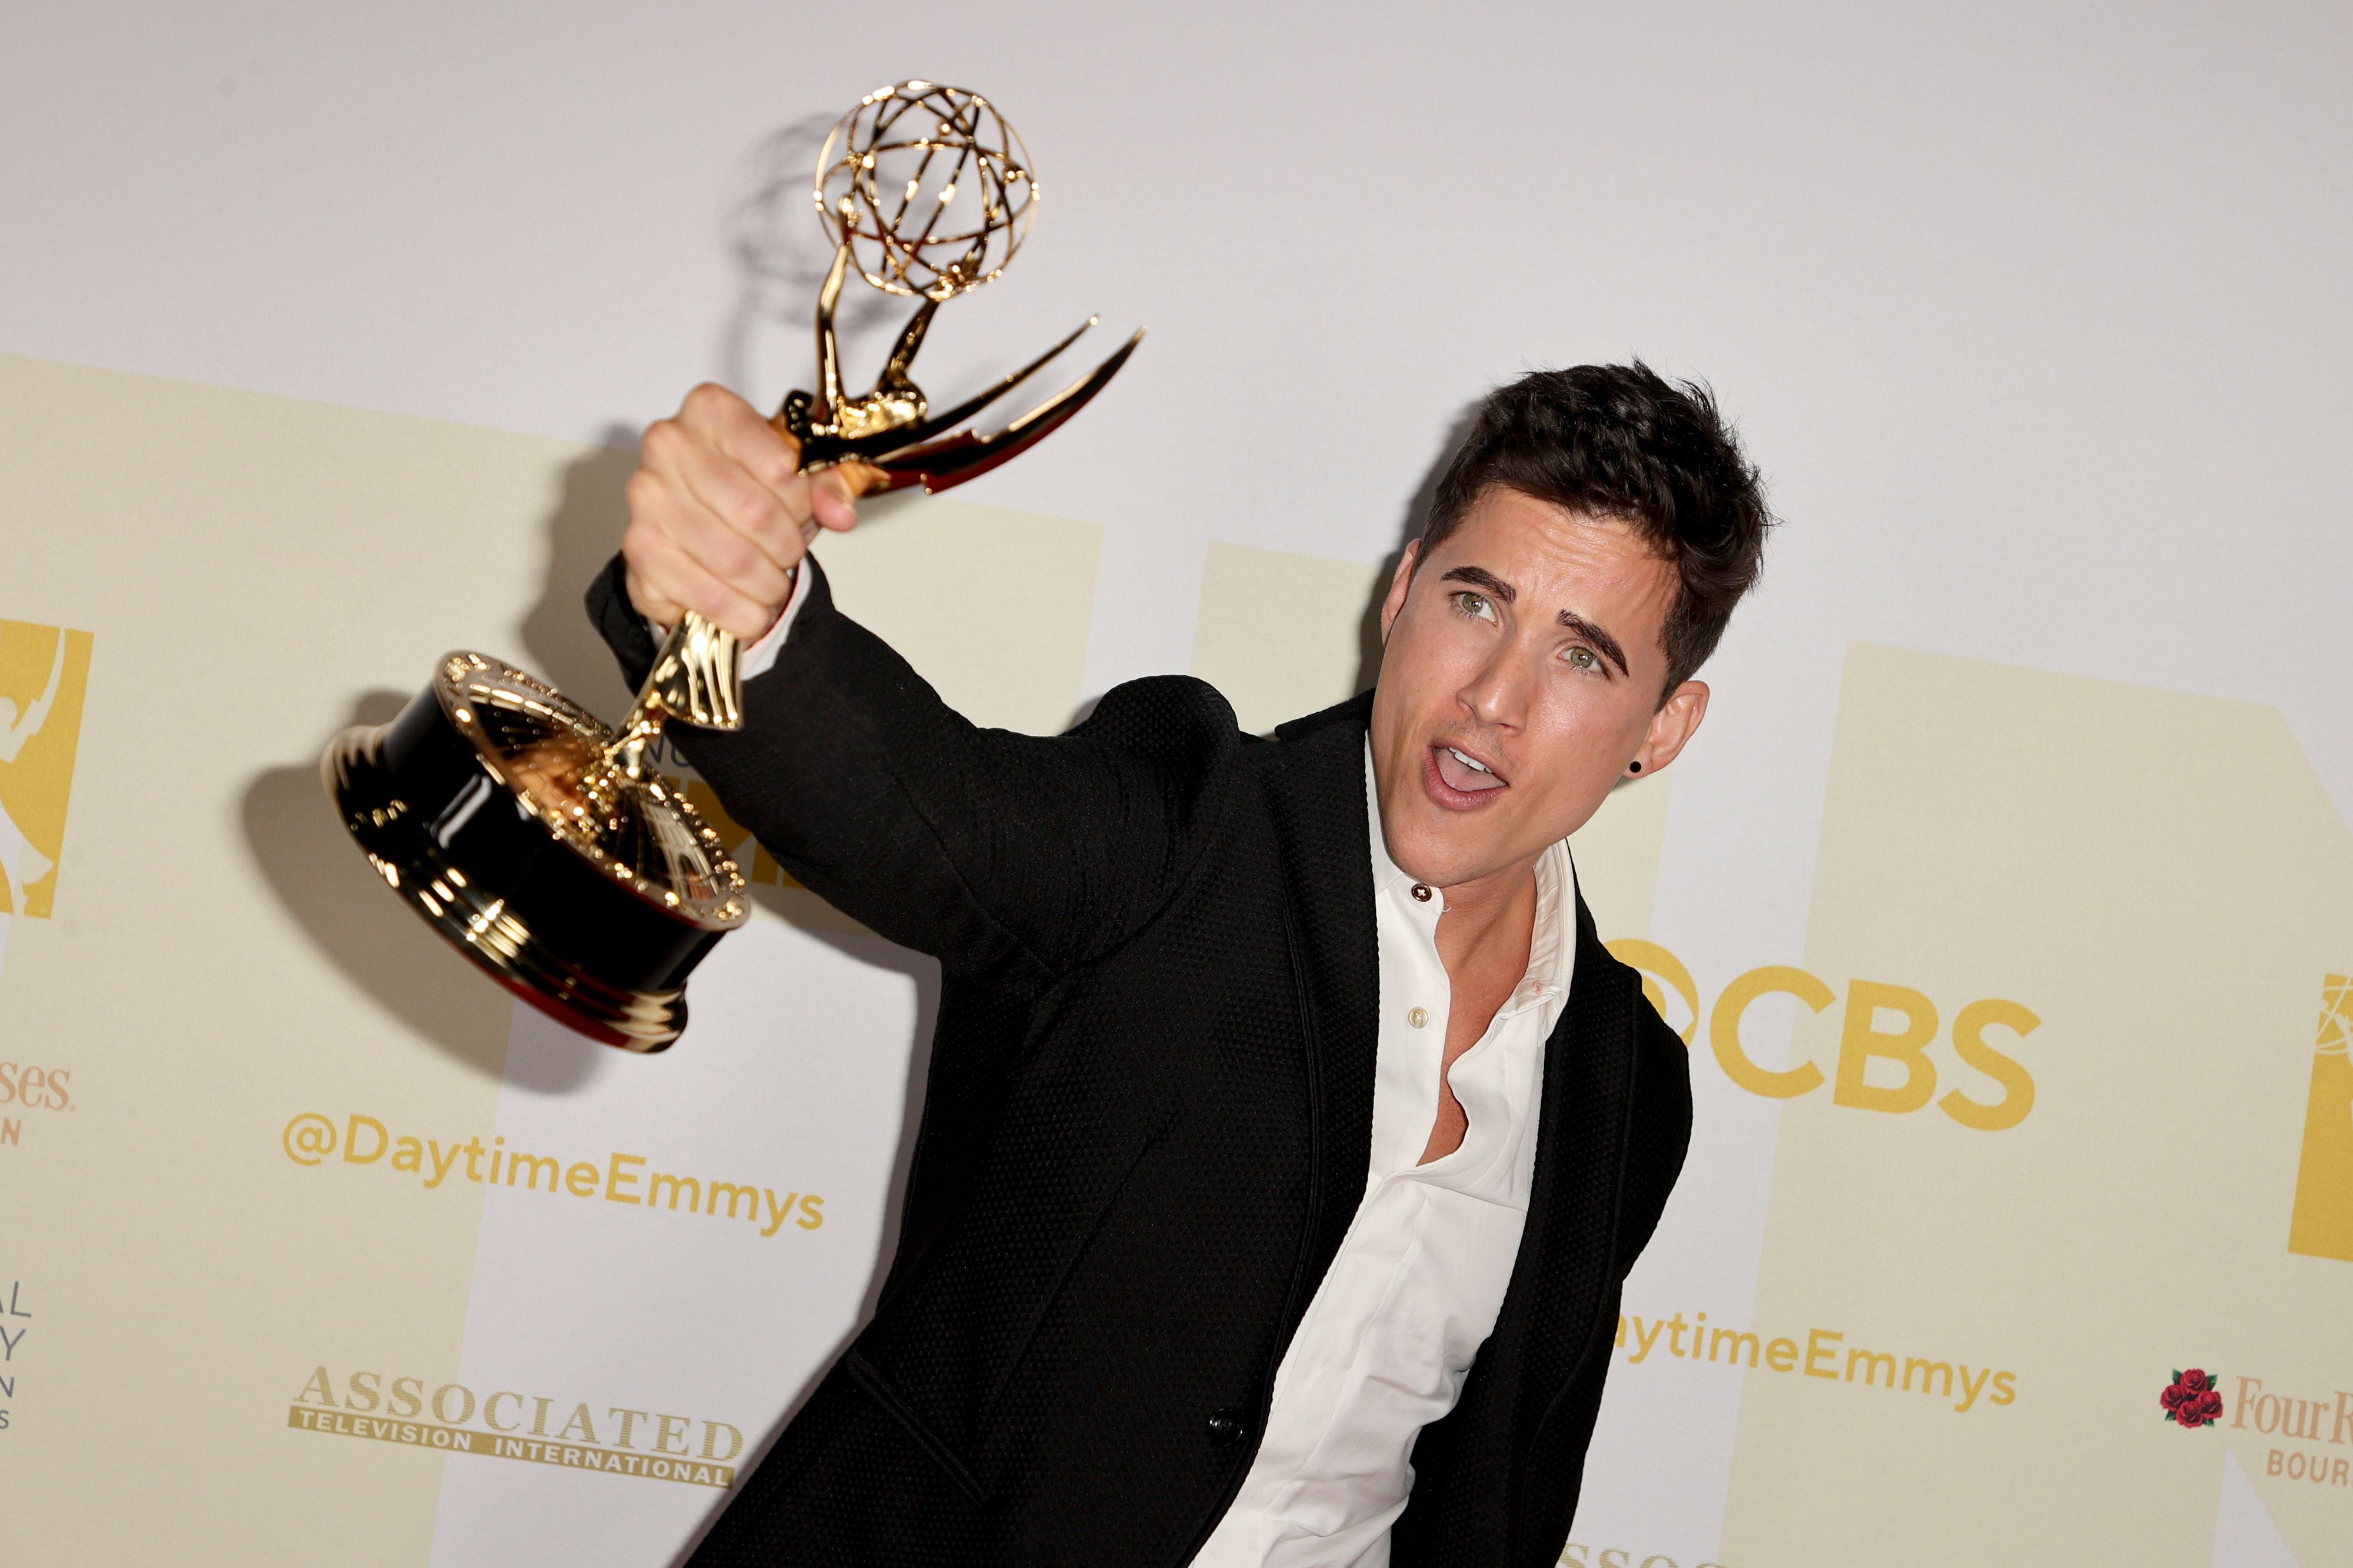 Actor Mike Manning holds up a Daytime Emmy award.